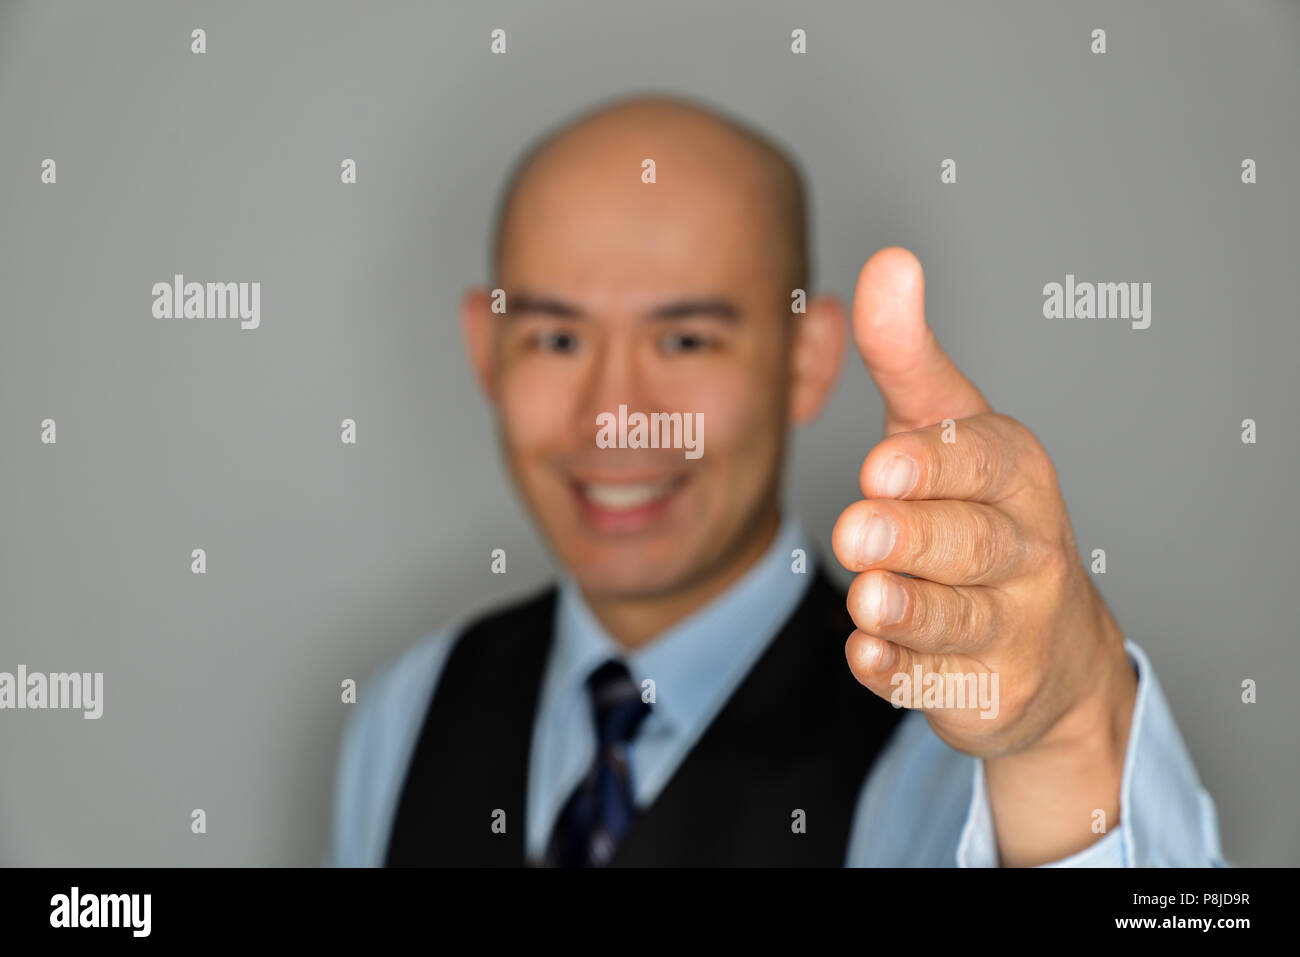 Blurred Businessman Offering Clear Handshake and Smile - Concept for Success, Teamwork and Welcome Stock Photo